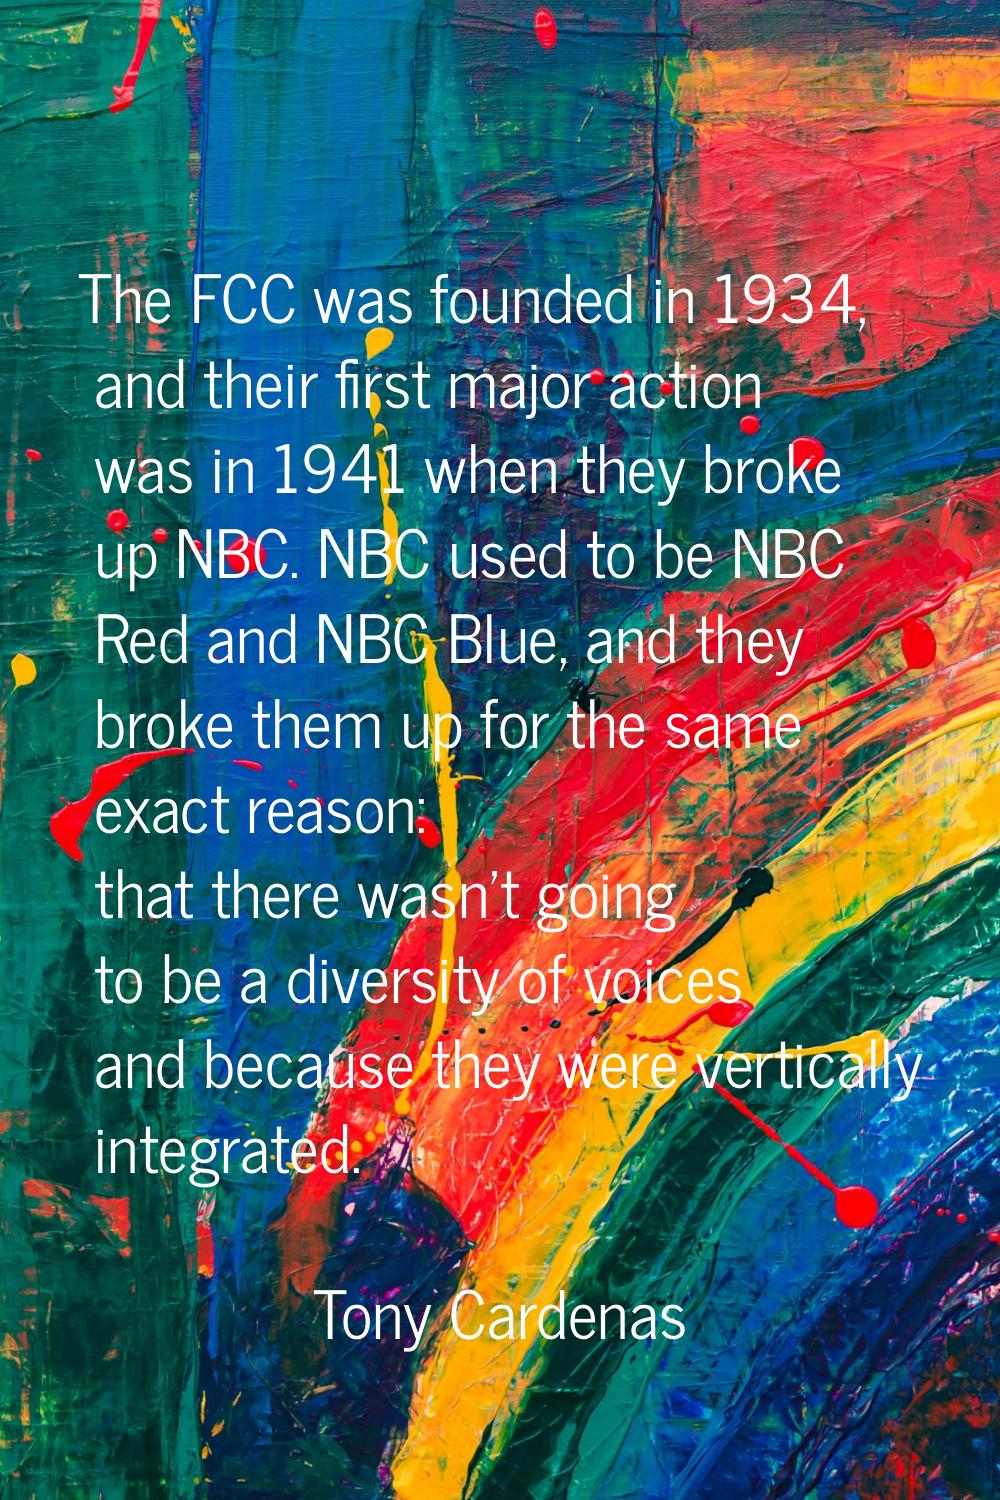 The FCC was founded in 1934, and their first major action was in 1941 when they broke up NBC. NBC u